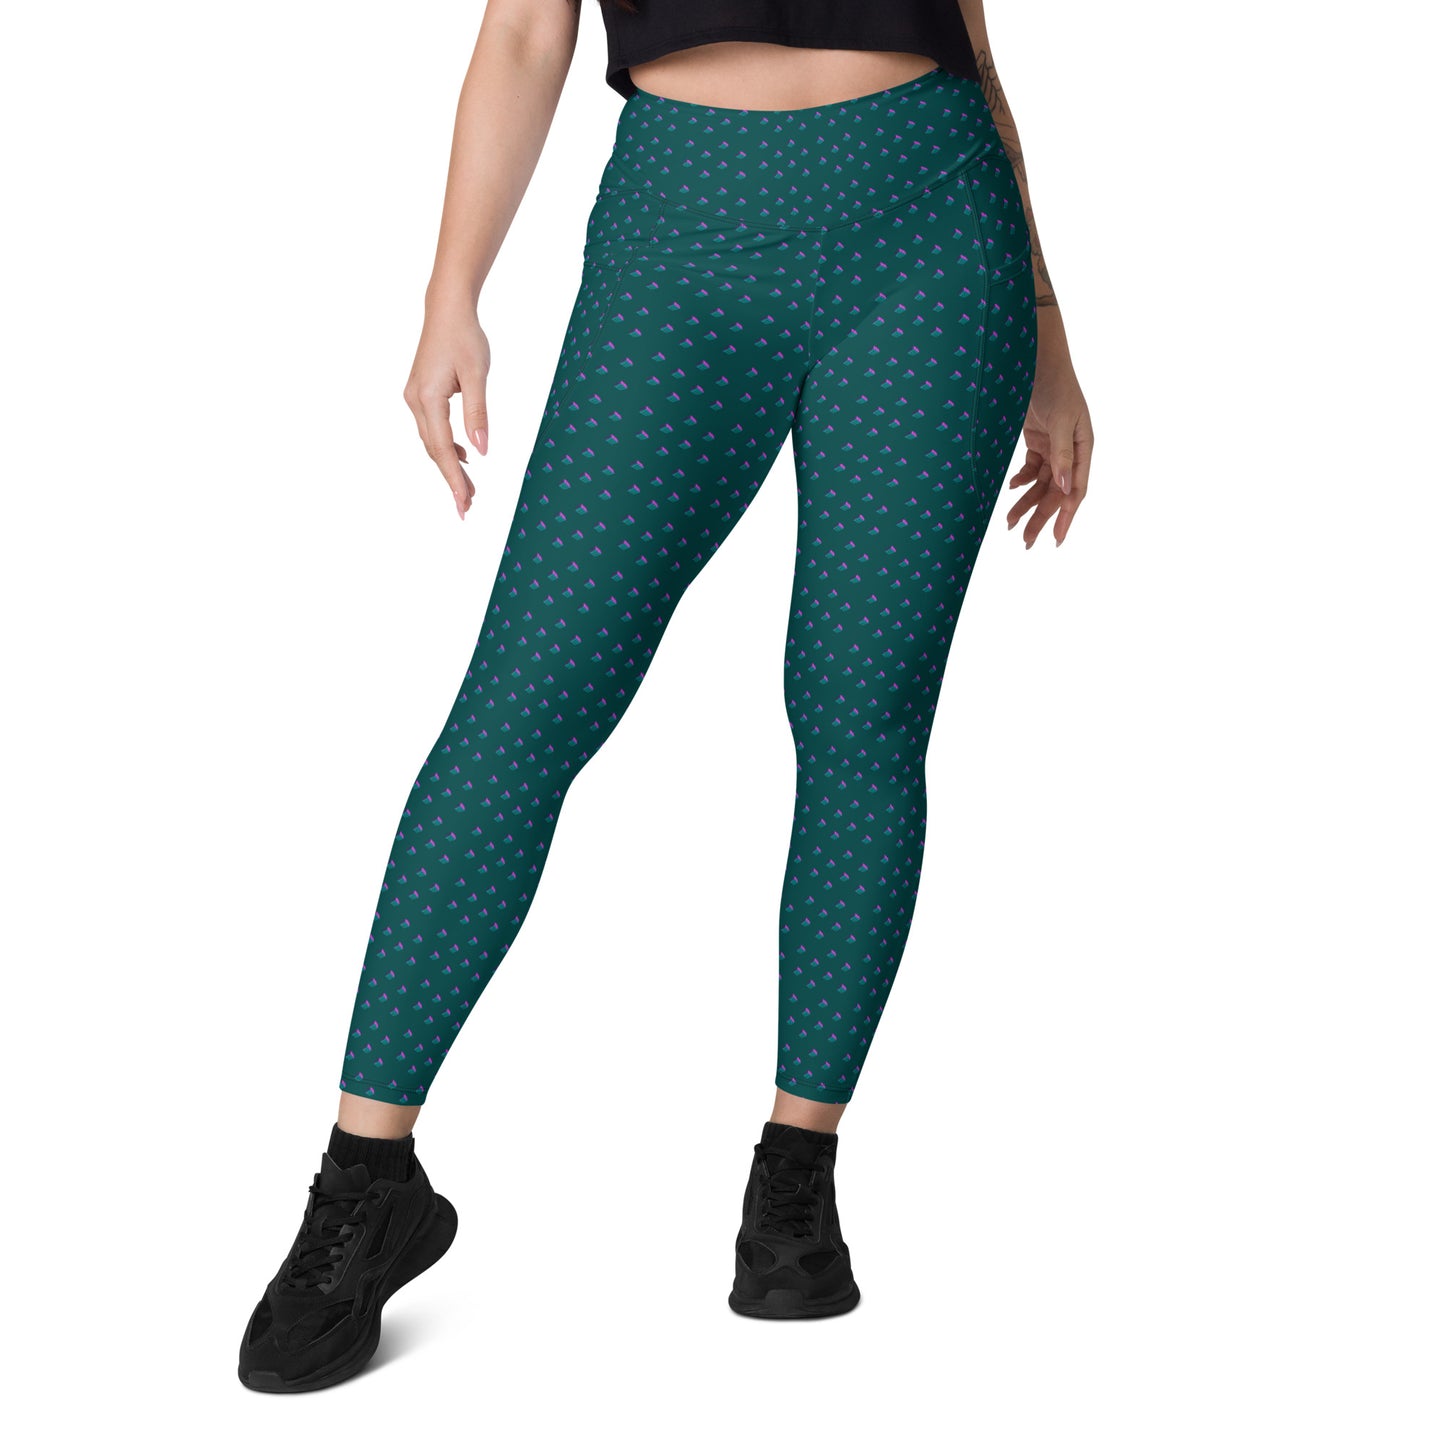 3x3 Cube Print Leggings with pockets